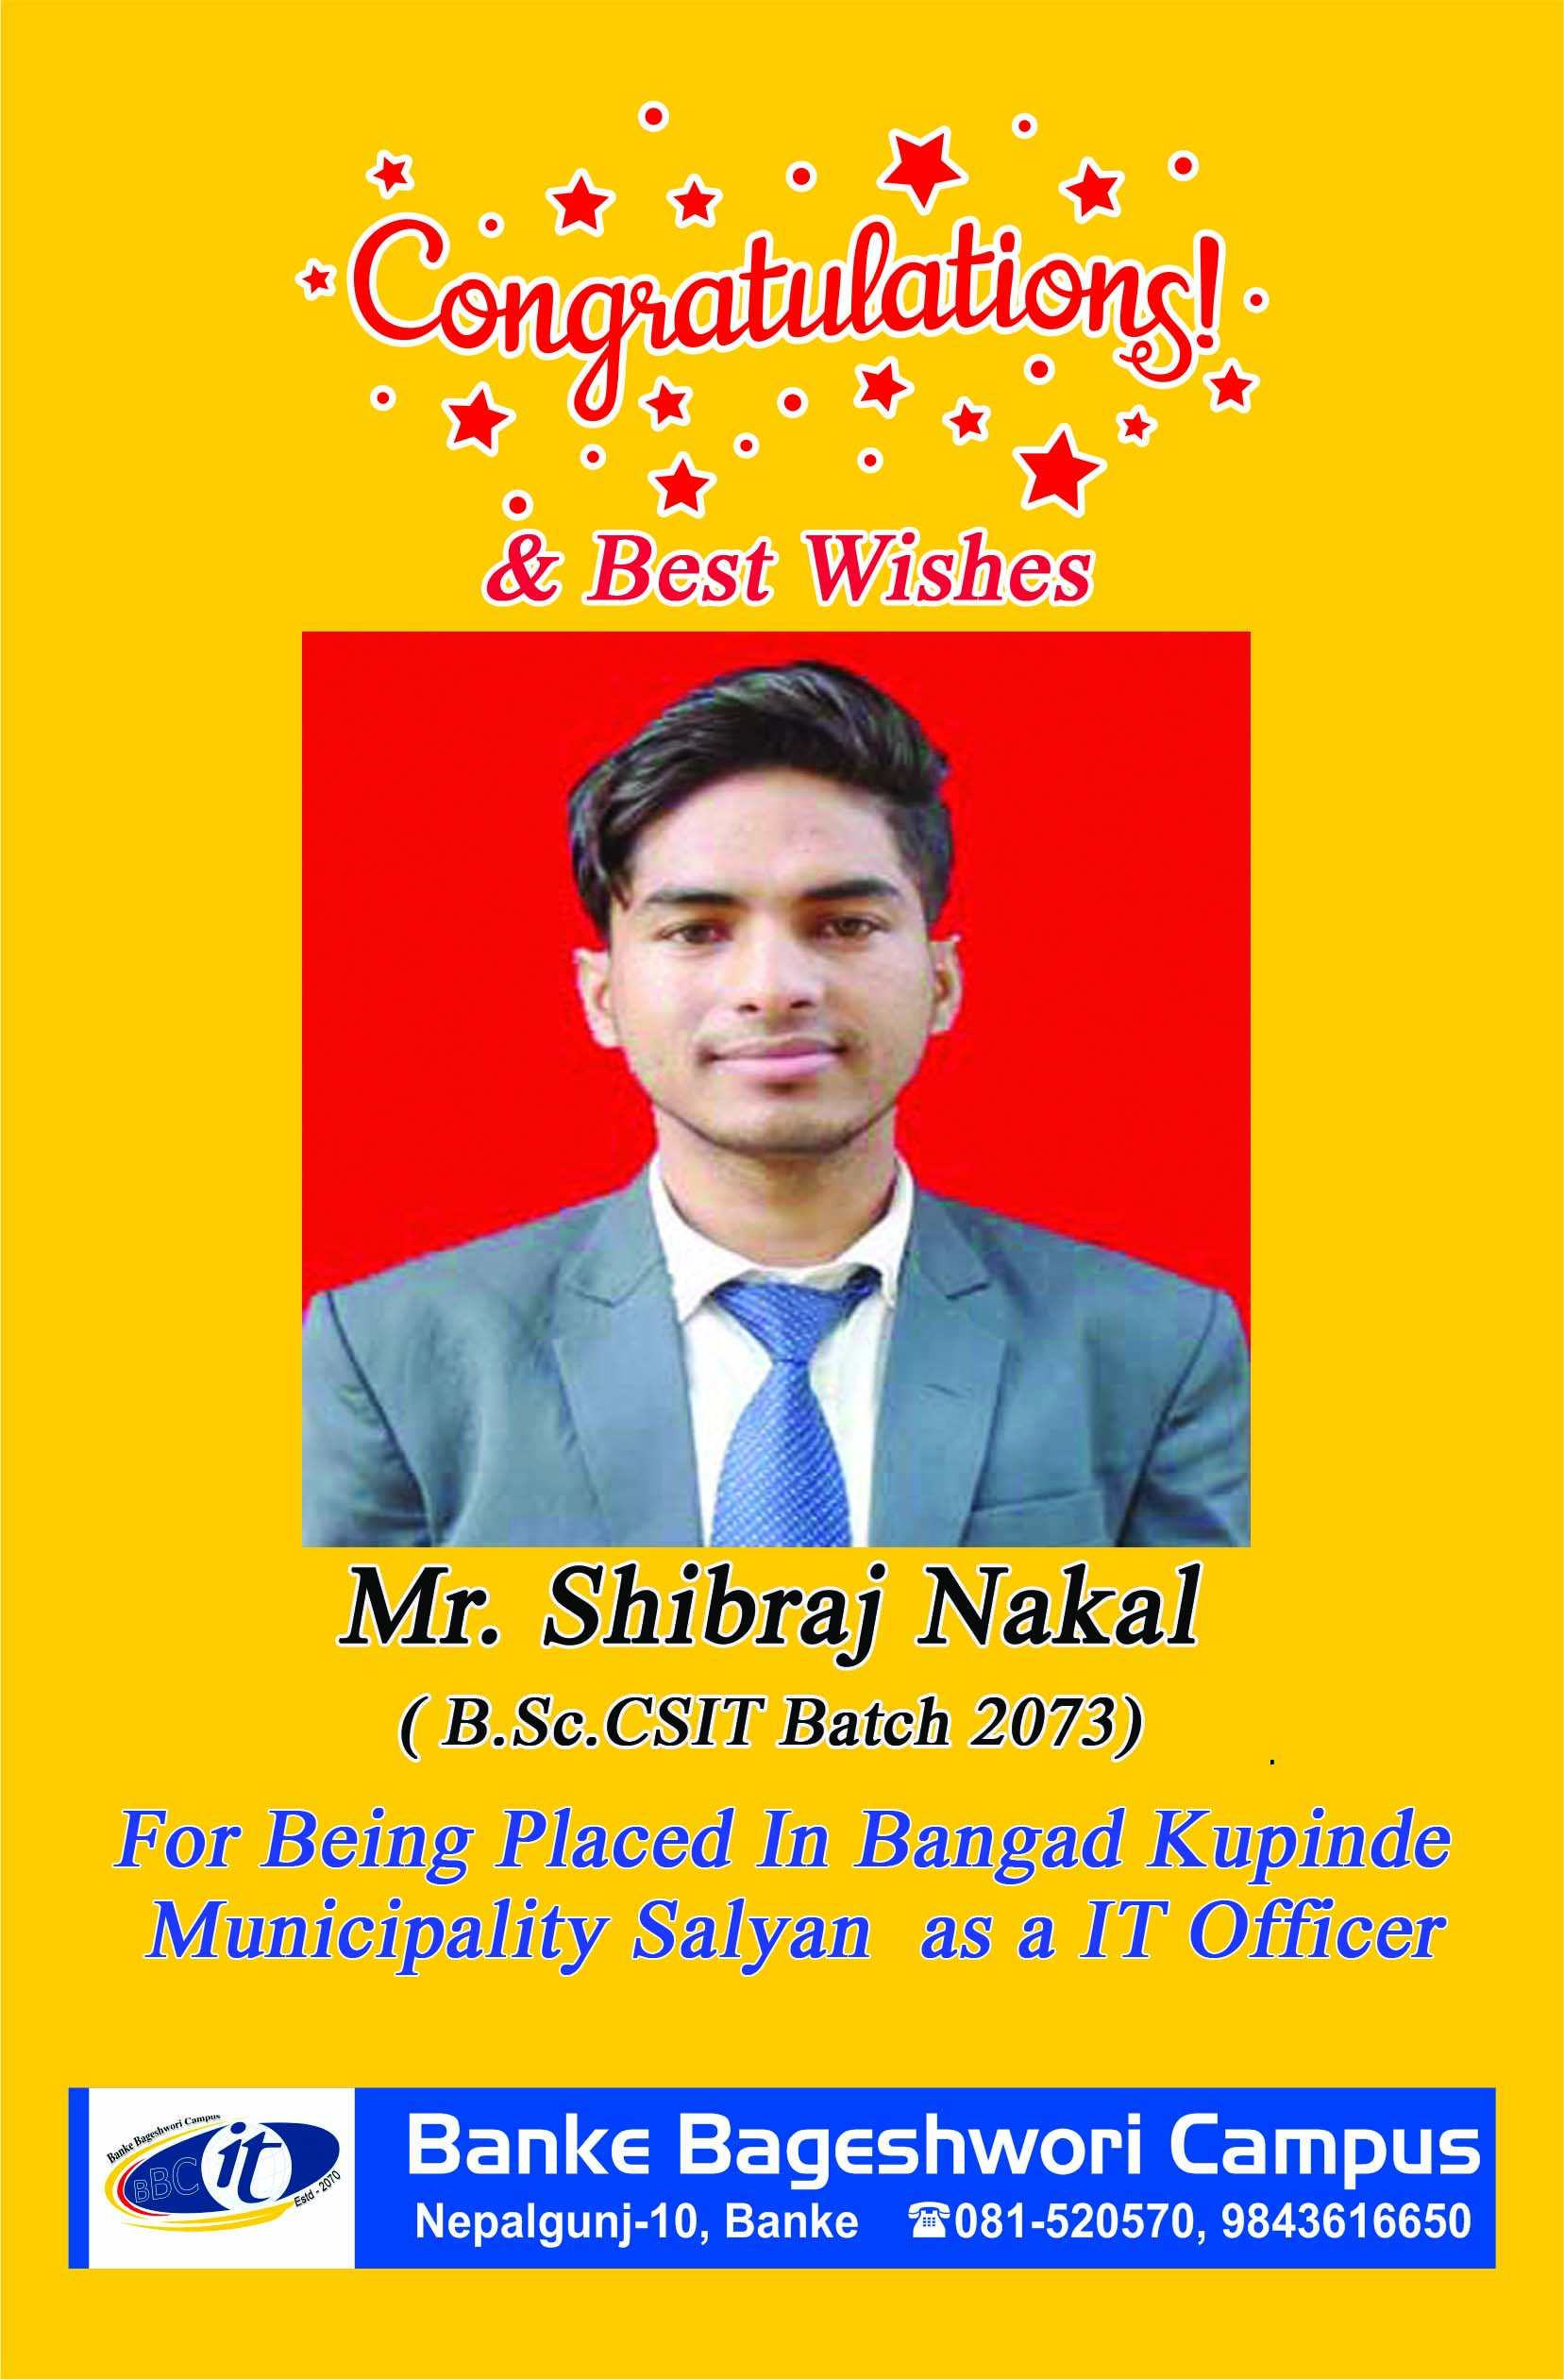 Congratulations And Best Wishes👏 For Being Placed In Bangad Kupinde Municipality Salyan as a IT Officer